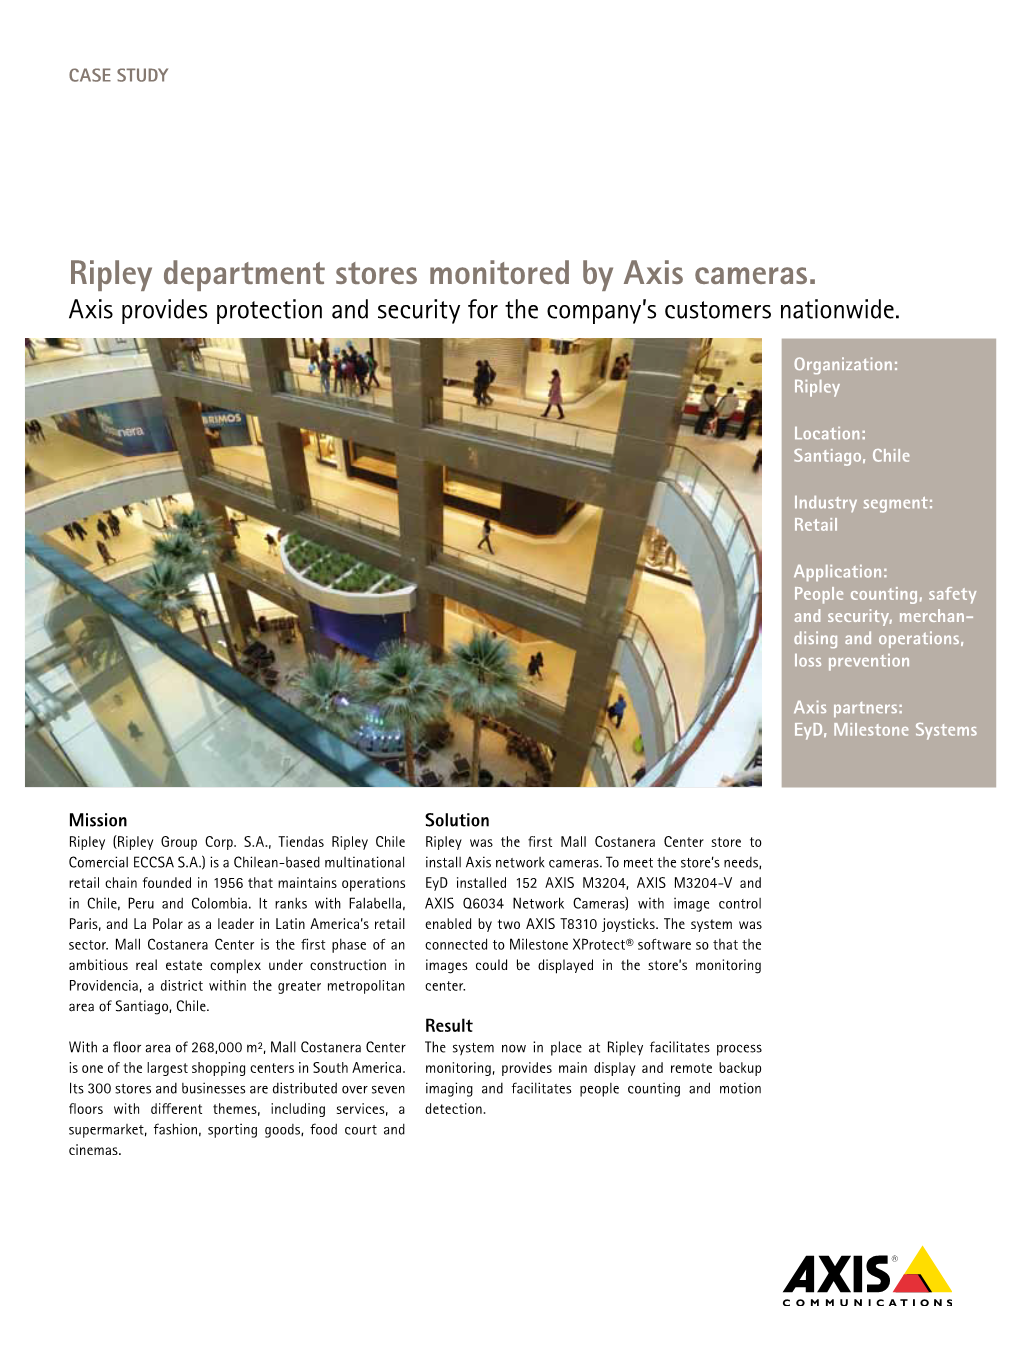 Ripley Department Stores Monitored by Axis Cameras. Axis Provides Protection and Security for the Company’S Customers Nationwide